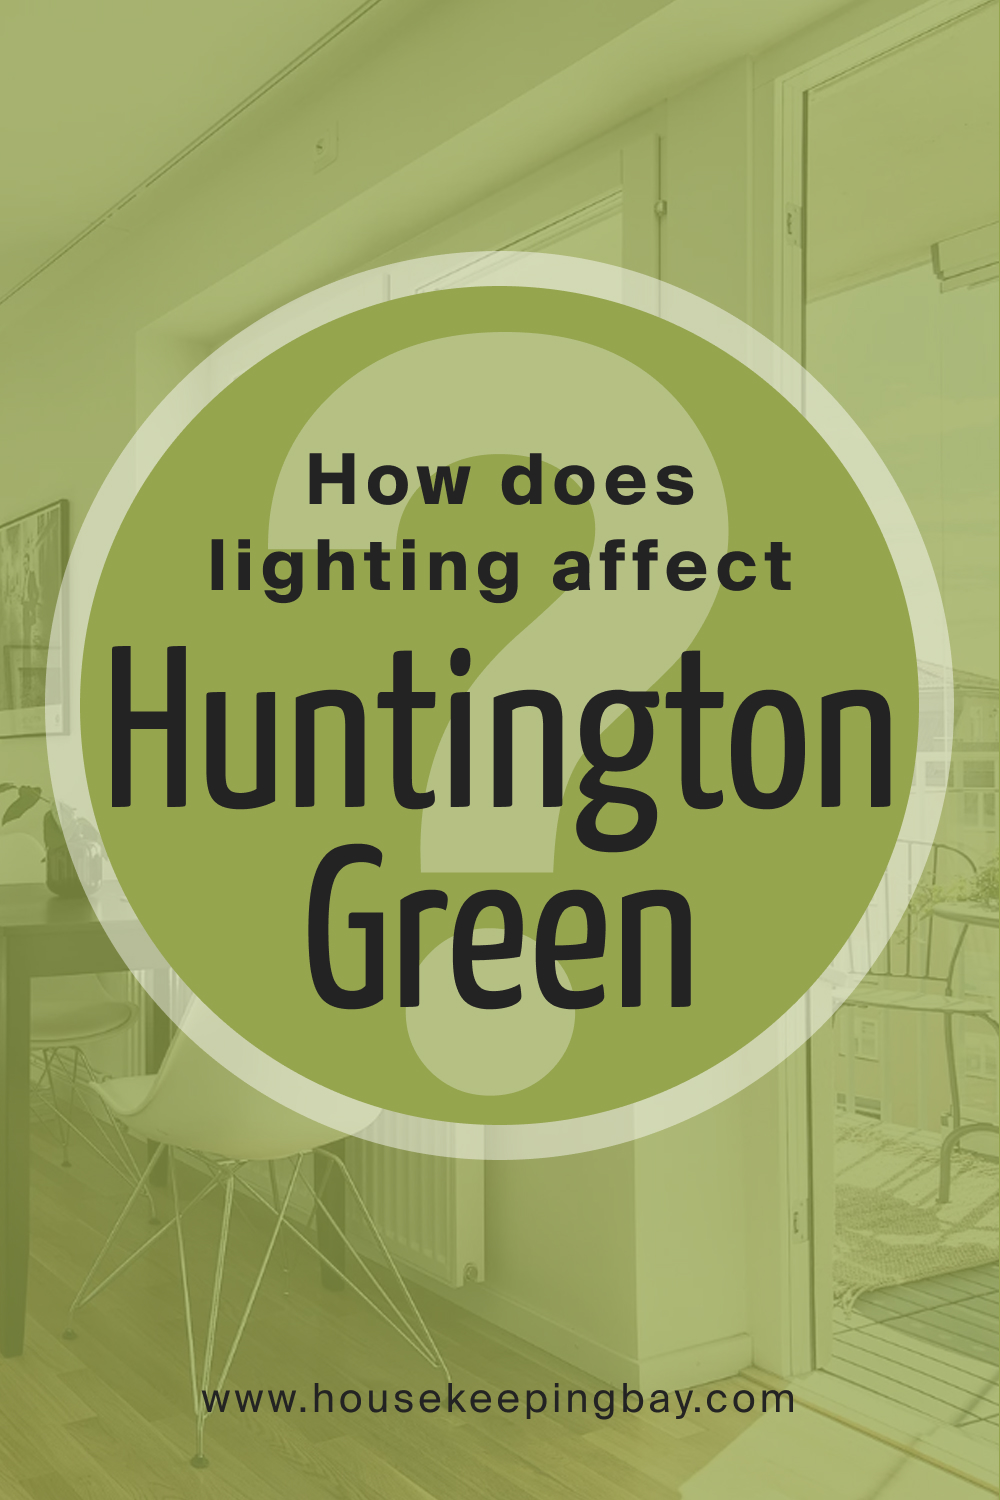 How Does Lighting Affect Huntington Green 406?